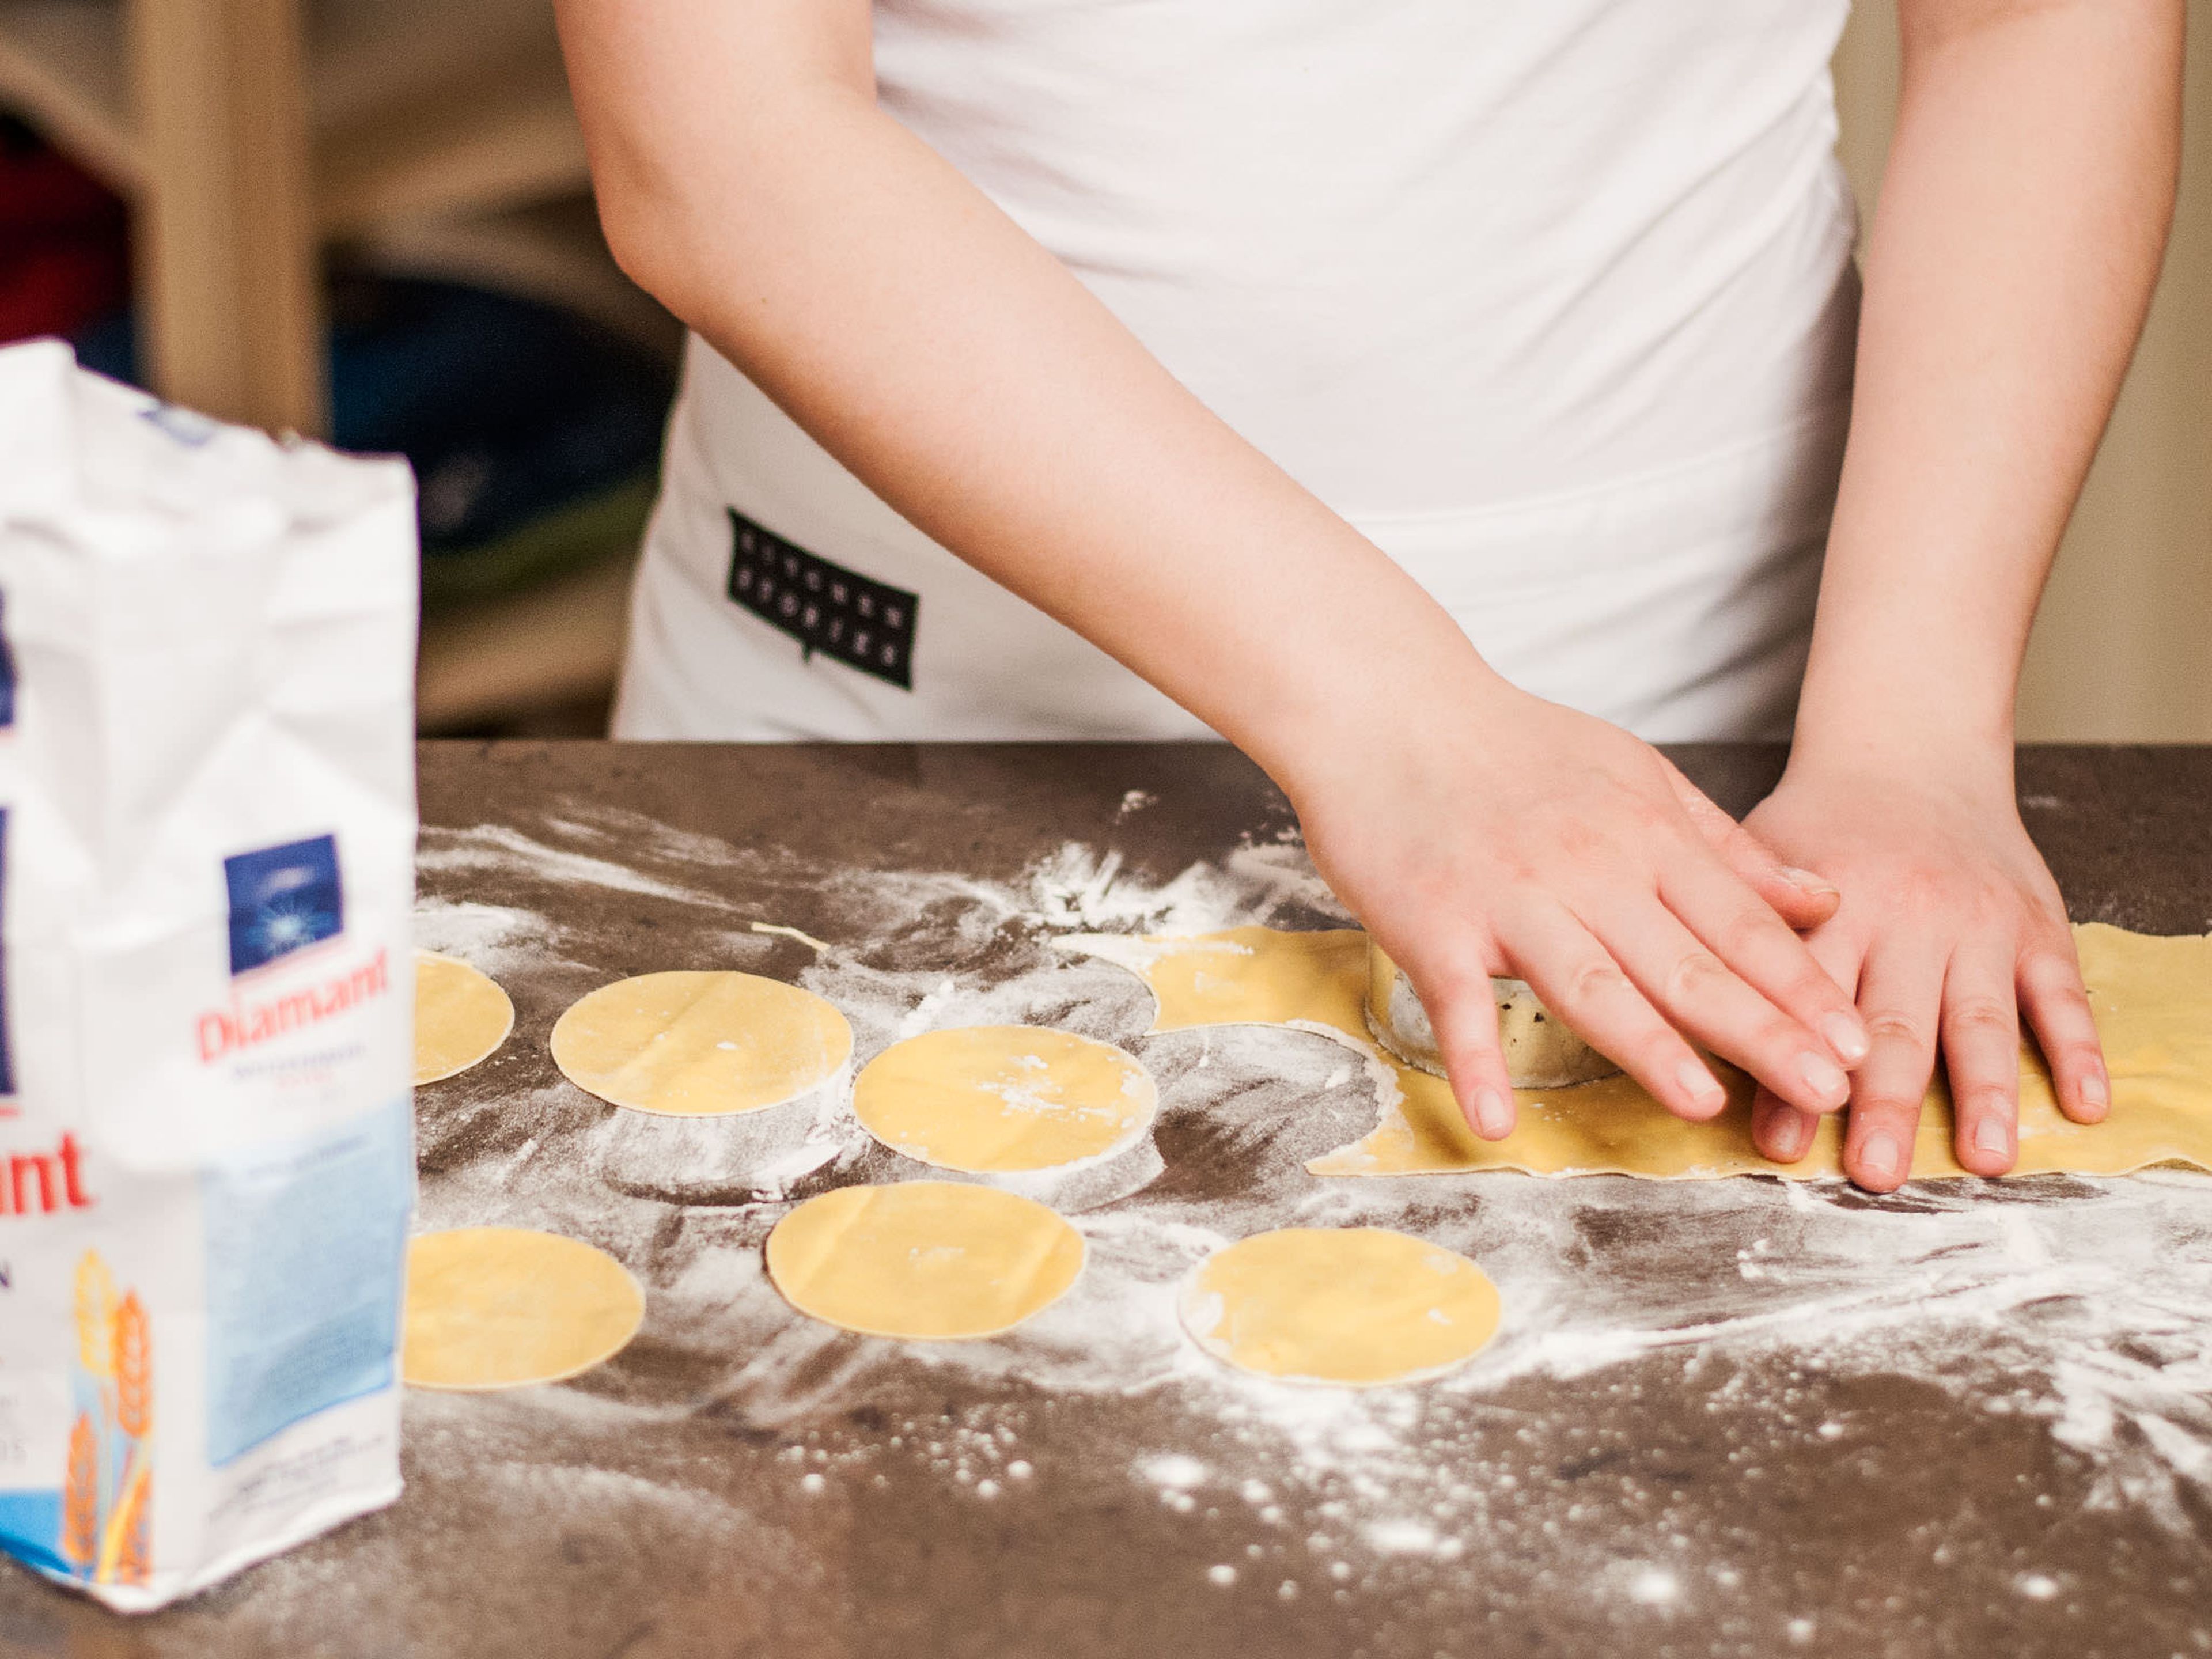 On a lightly floured work surface, roll out the pasta dough with a pasta machine and punch out circles using a circular cutter of about 6 cm in diameter.